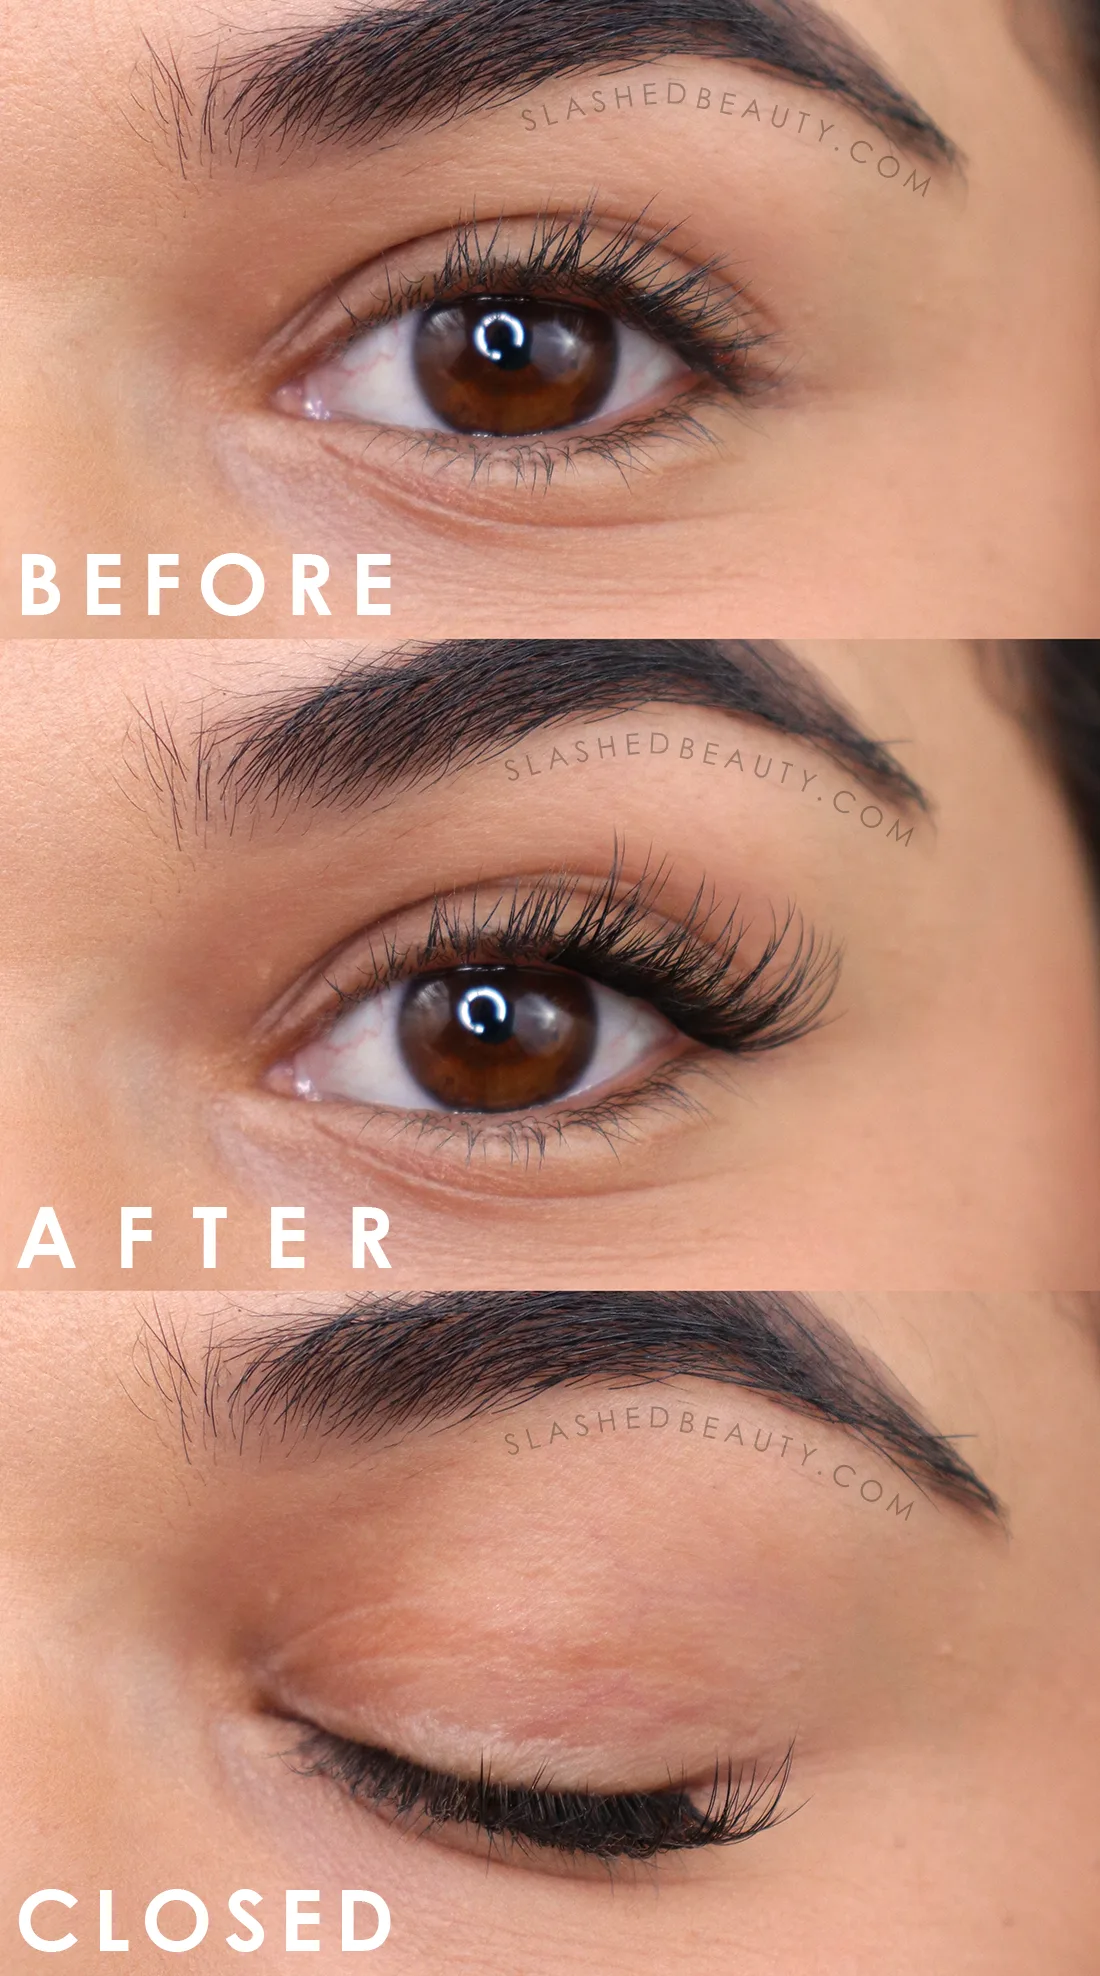 Before and after applying Kiss imPRESS Press On Falsies in Natural | No Glue Press On False Lashes Review | Slashed Beauty